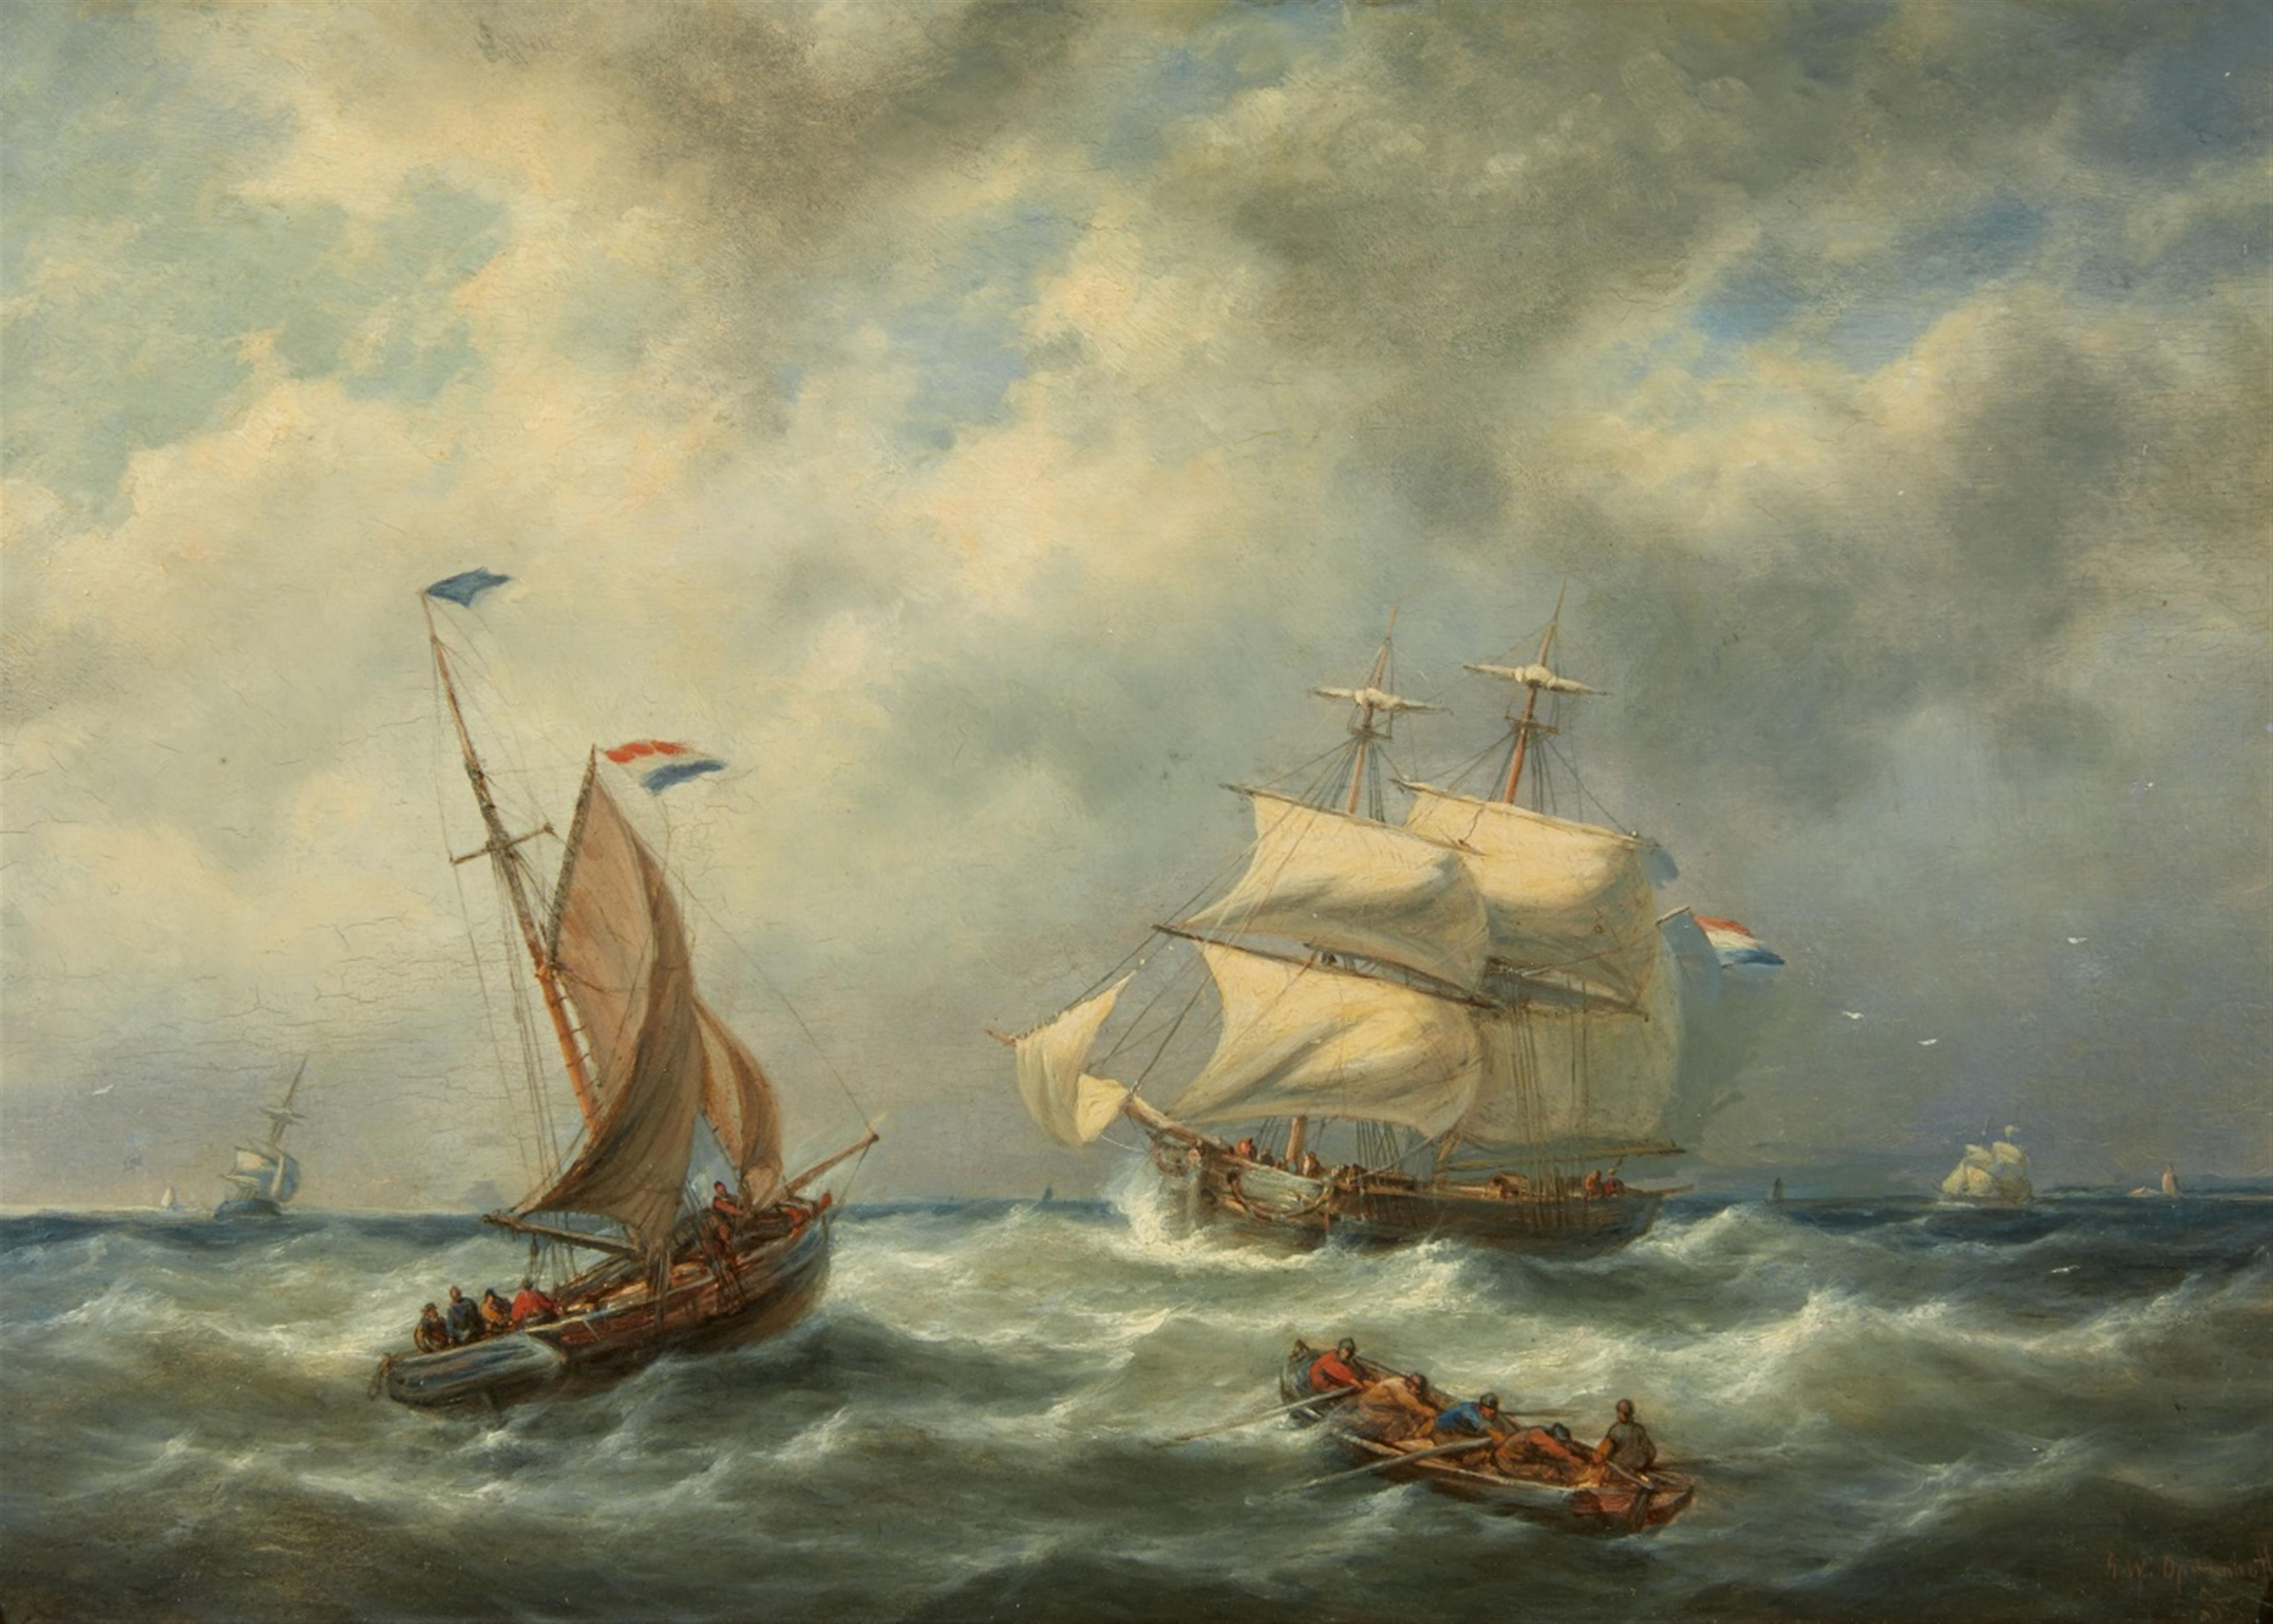 Georg Willem Opdenhoff - A Sailing Ship and Fishing Boats in Stormy Seas - image-1